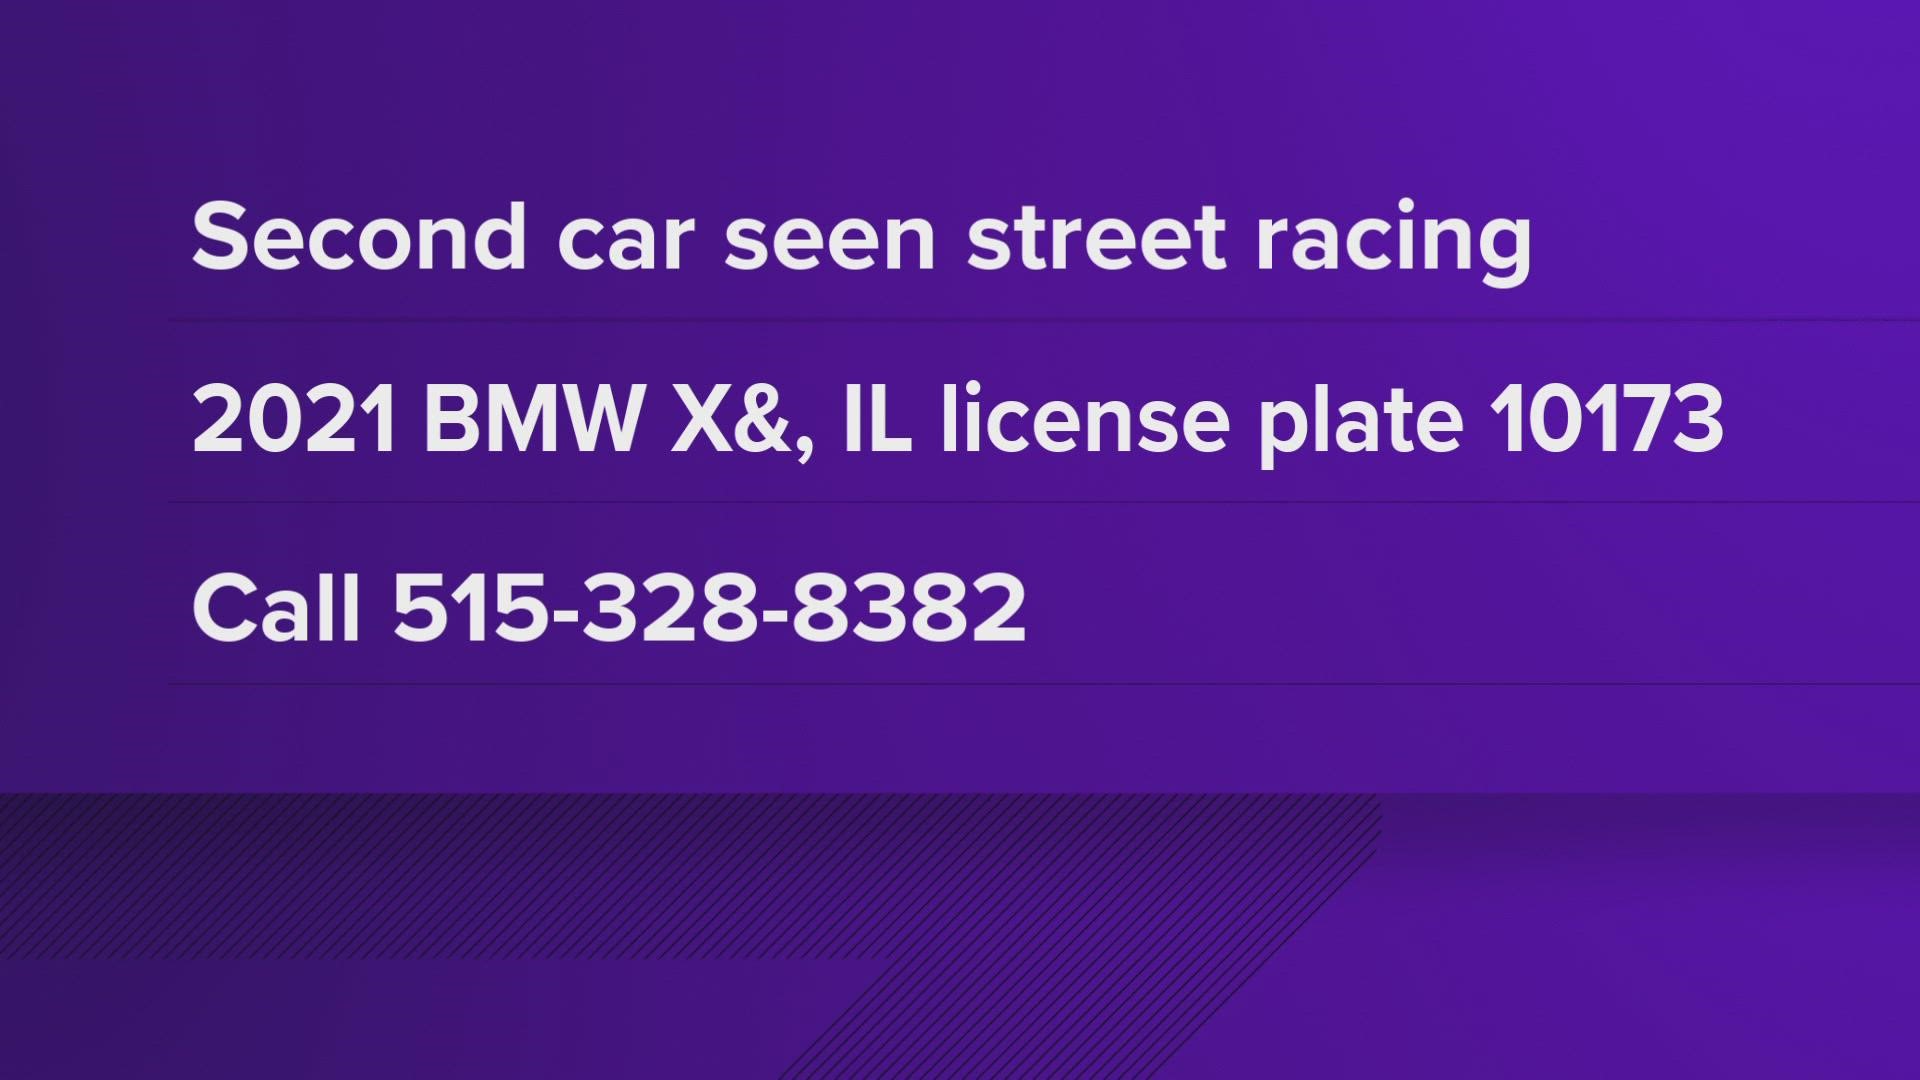 Des Moines police are still searching for the second street racing vehicle that fled the scene. They believe it's a 2021 BMW X7 with an Illinois license plate 10173.